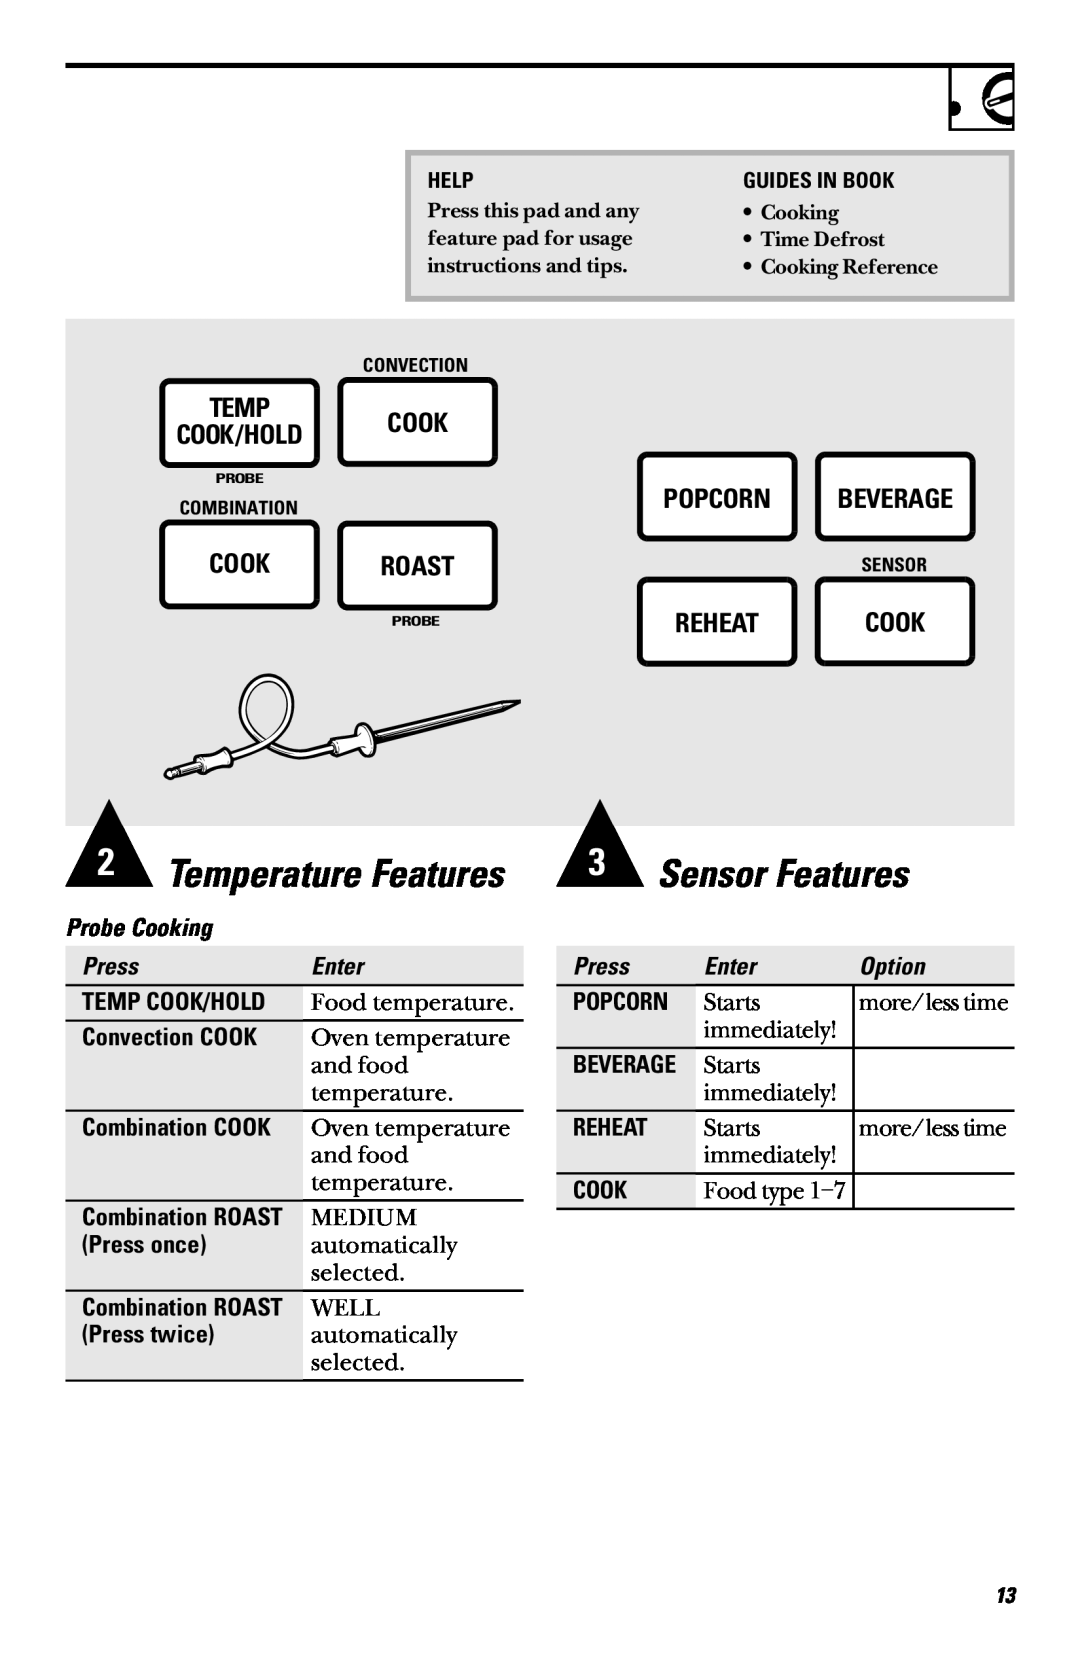 GE 49-40002 Sensor Features, Temperature Features, Temp Cook/Hold Cook, Convection COOK, Combination COOK, Press once 